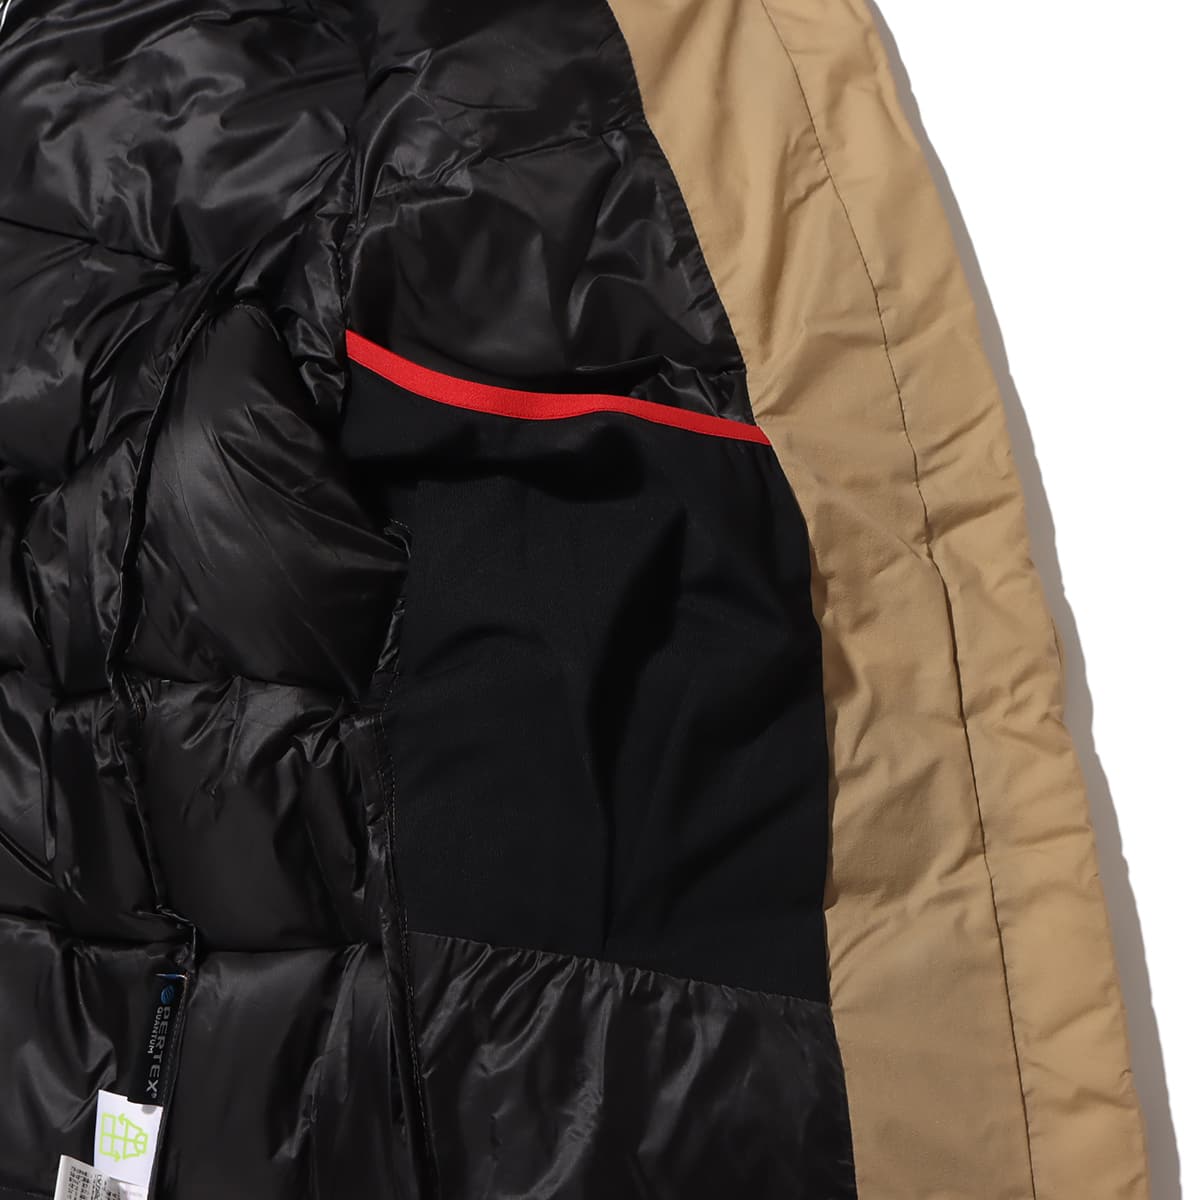 THE NORTH FACE BELAYER PARKA ケプルタン 23FW-I